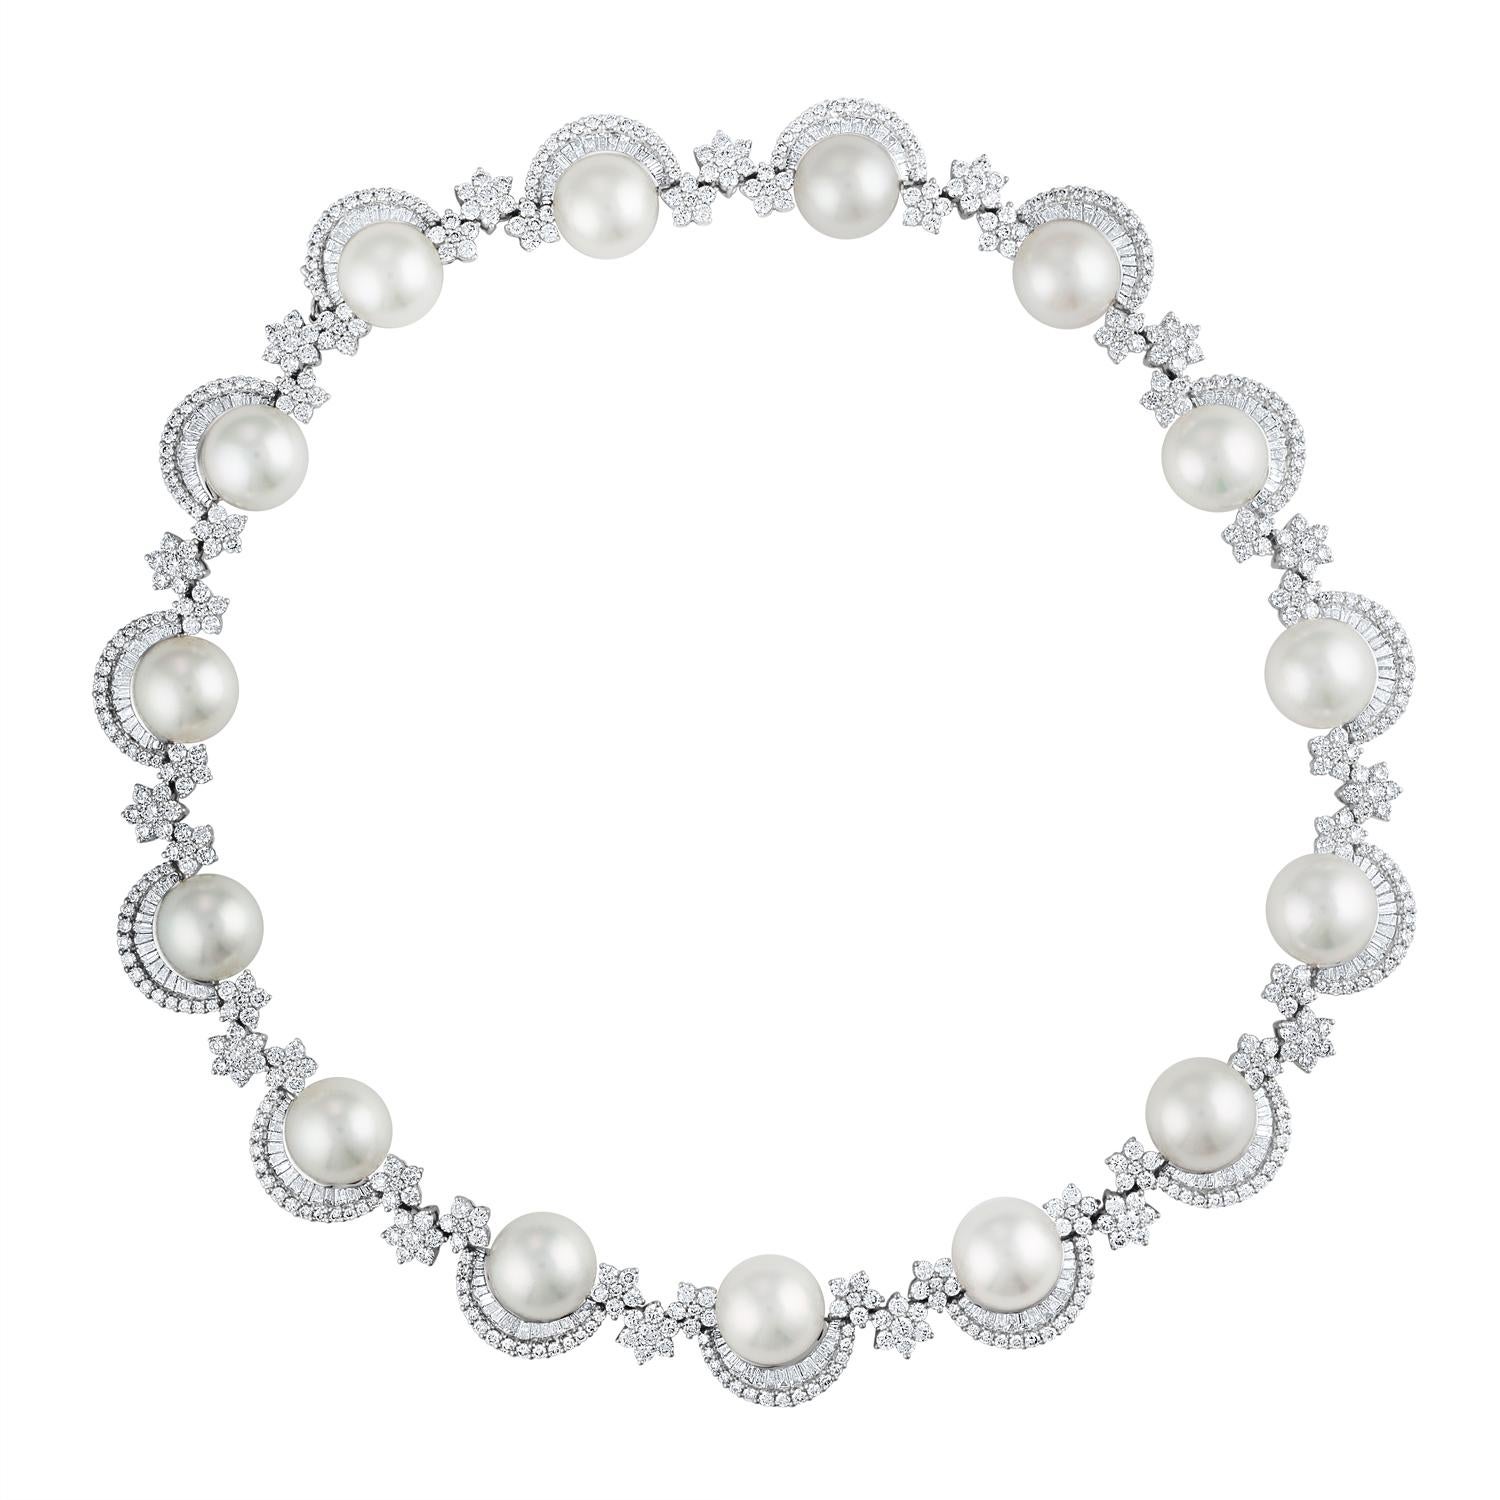 Stunning 3-Piece Set
The set consists of 1 Bracelet, 1 Necklace, & 1 Pair of Earrings

The necklace is 18K White Gold
There are 27.85 Carats in Diamonds F/G VS/SI
There are 15 South Sea Pearls 13mm Each
The necklace is 18